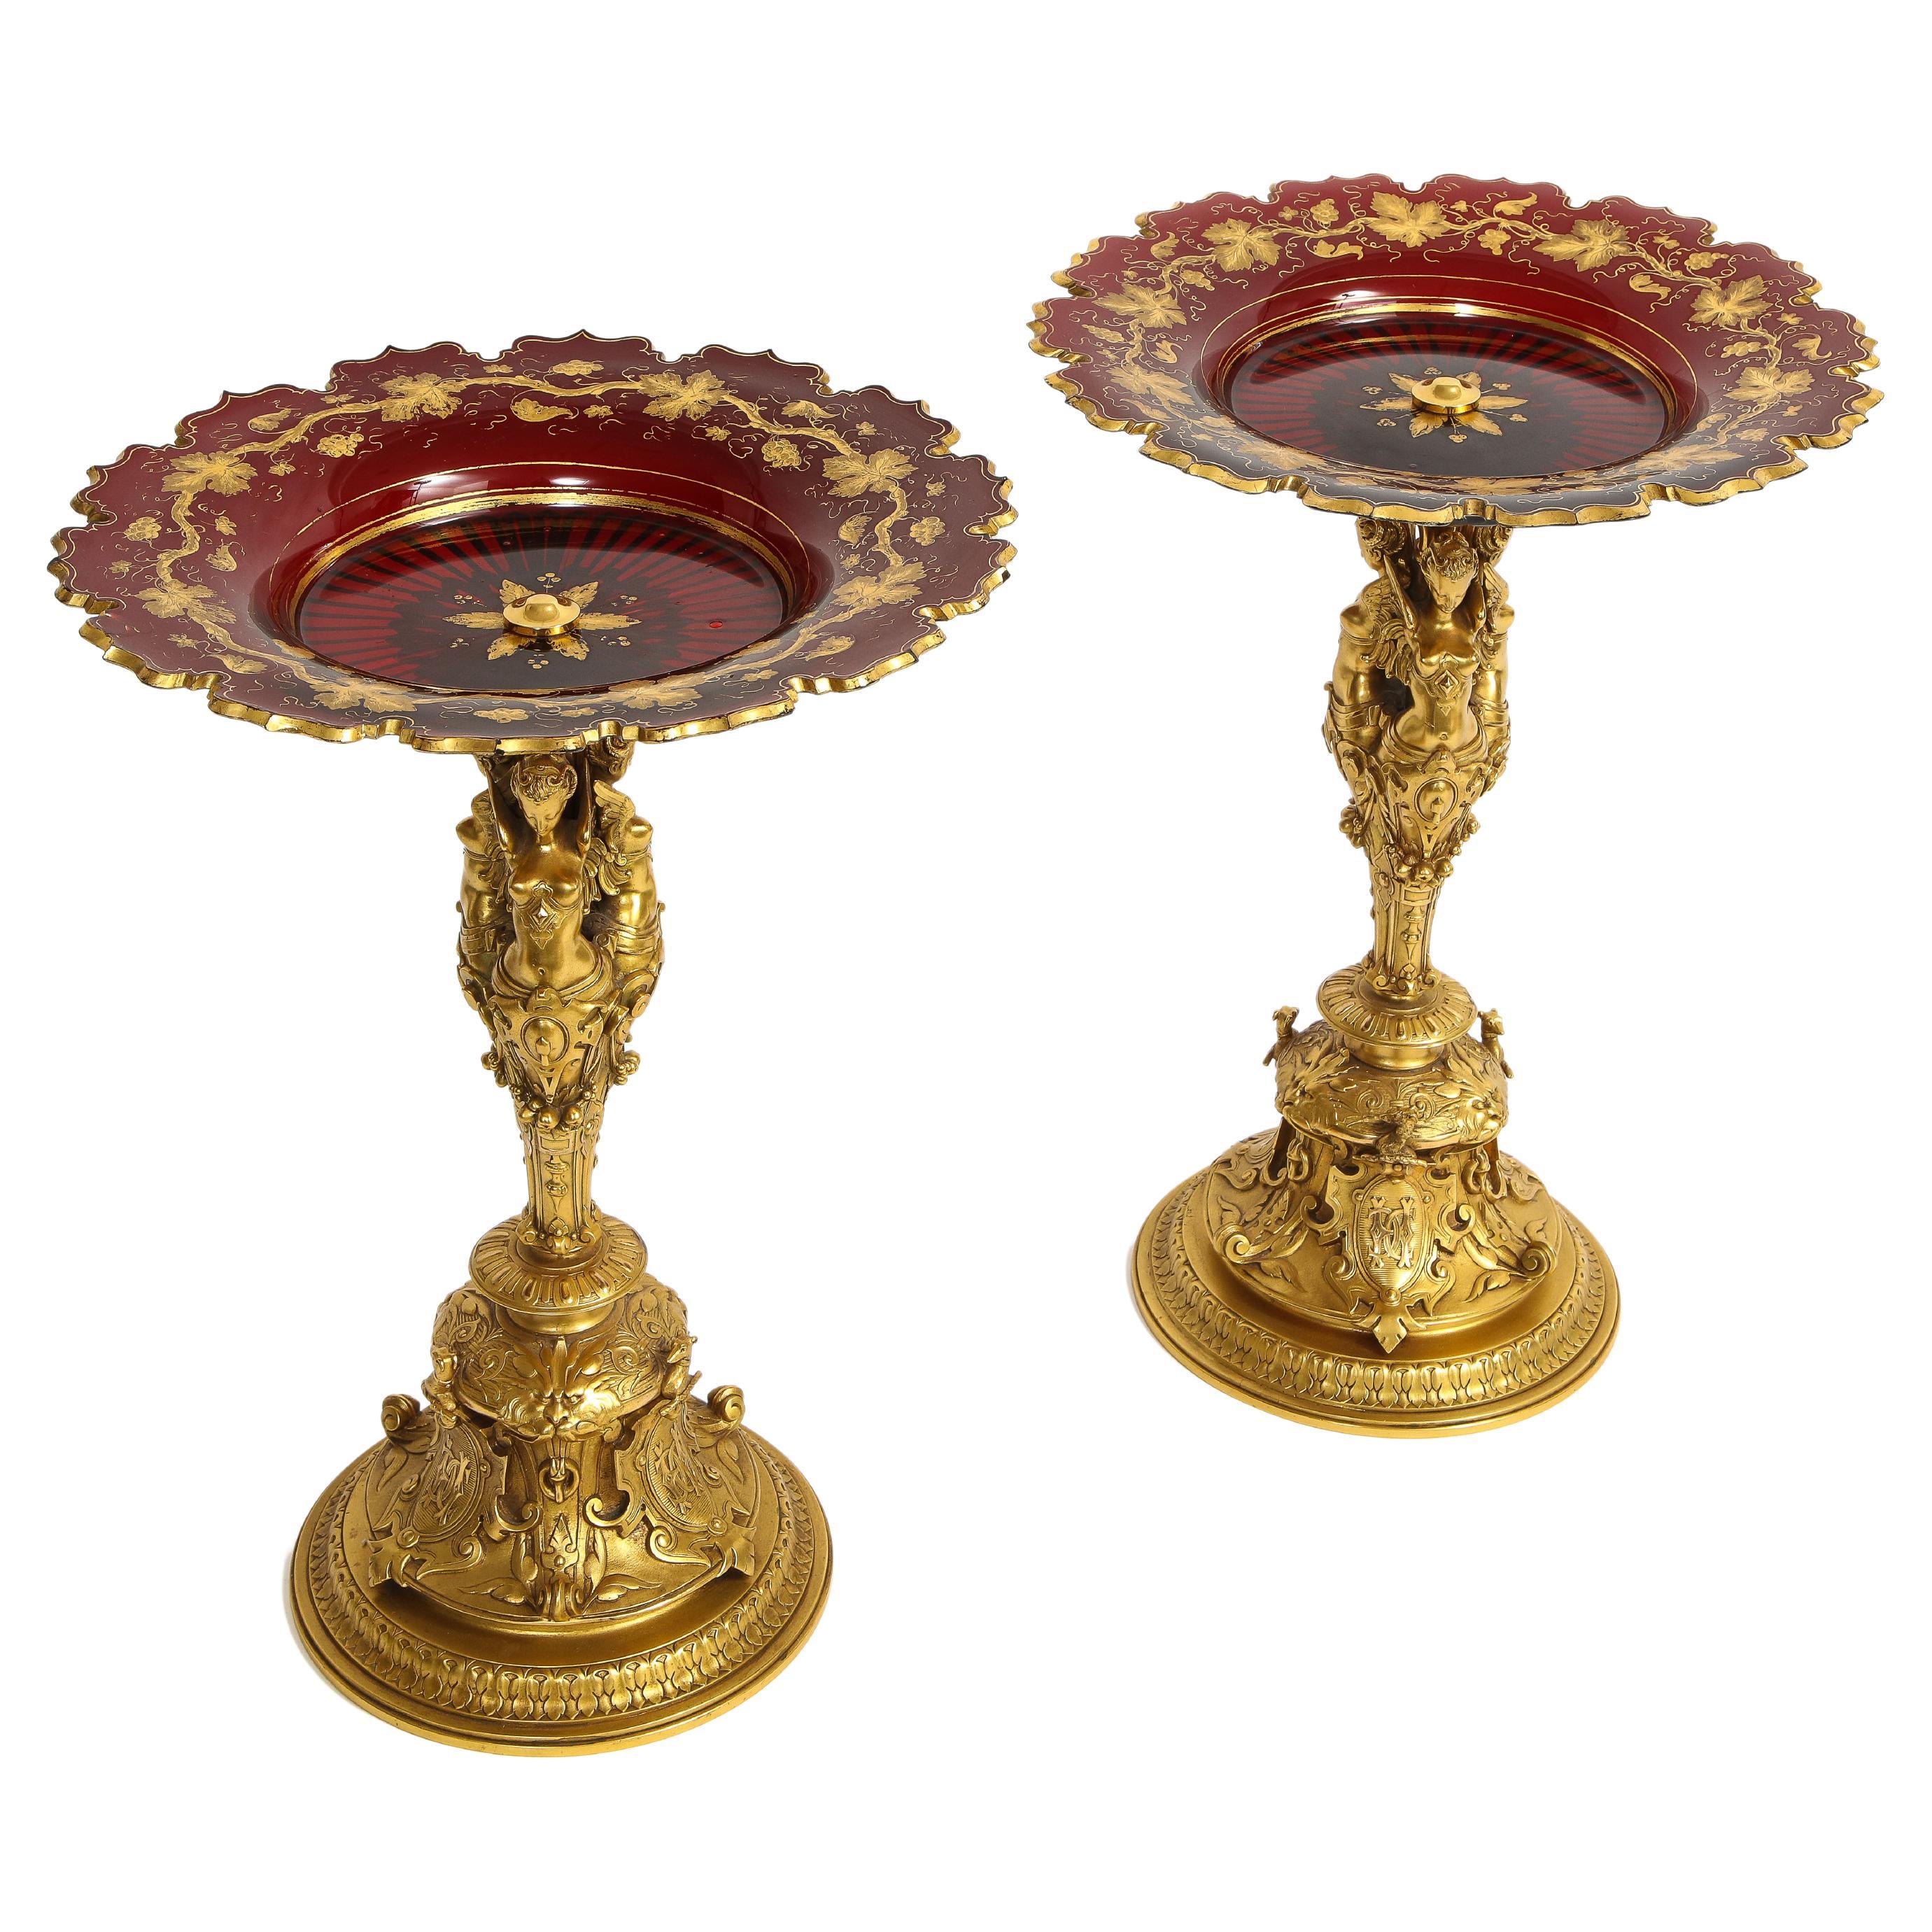 Pair French 19th C. Louis XVI Style Red Baccarat Crystal Ormolu Mounted Tazzas